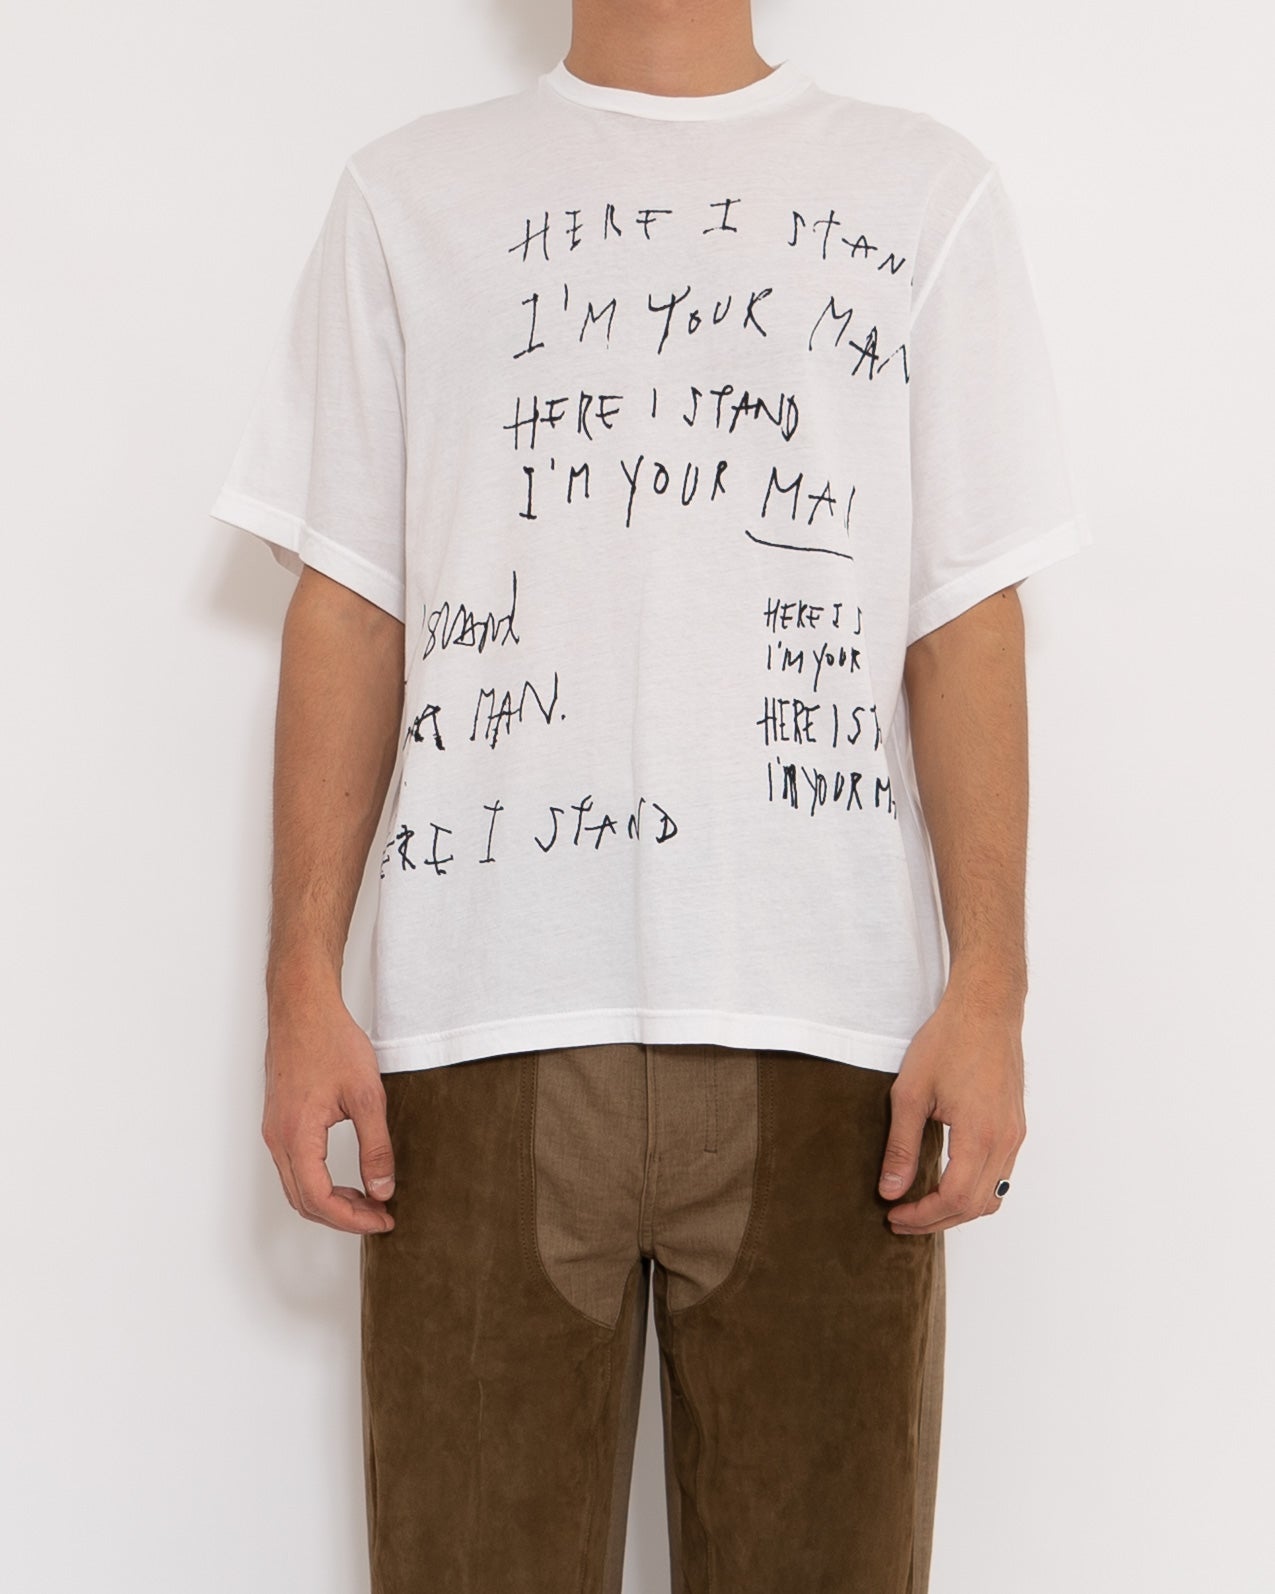 SS19 "Here I Stand, Im Your Man" T-Shirt Sample